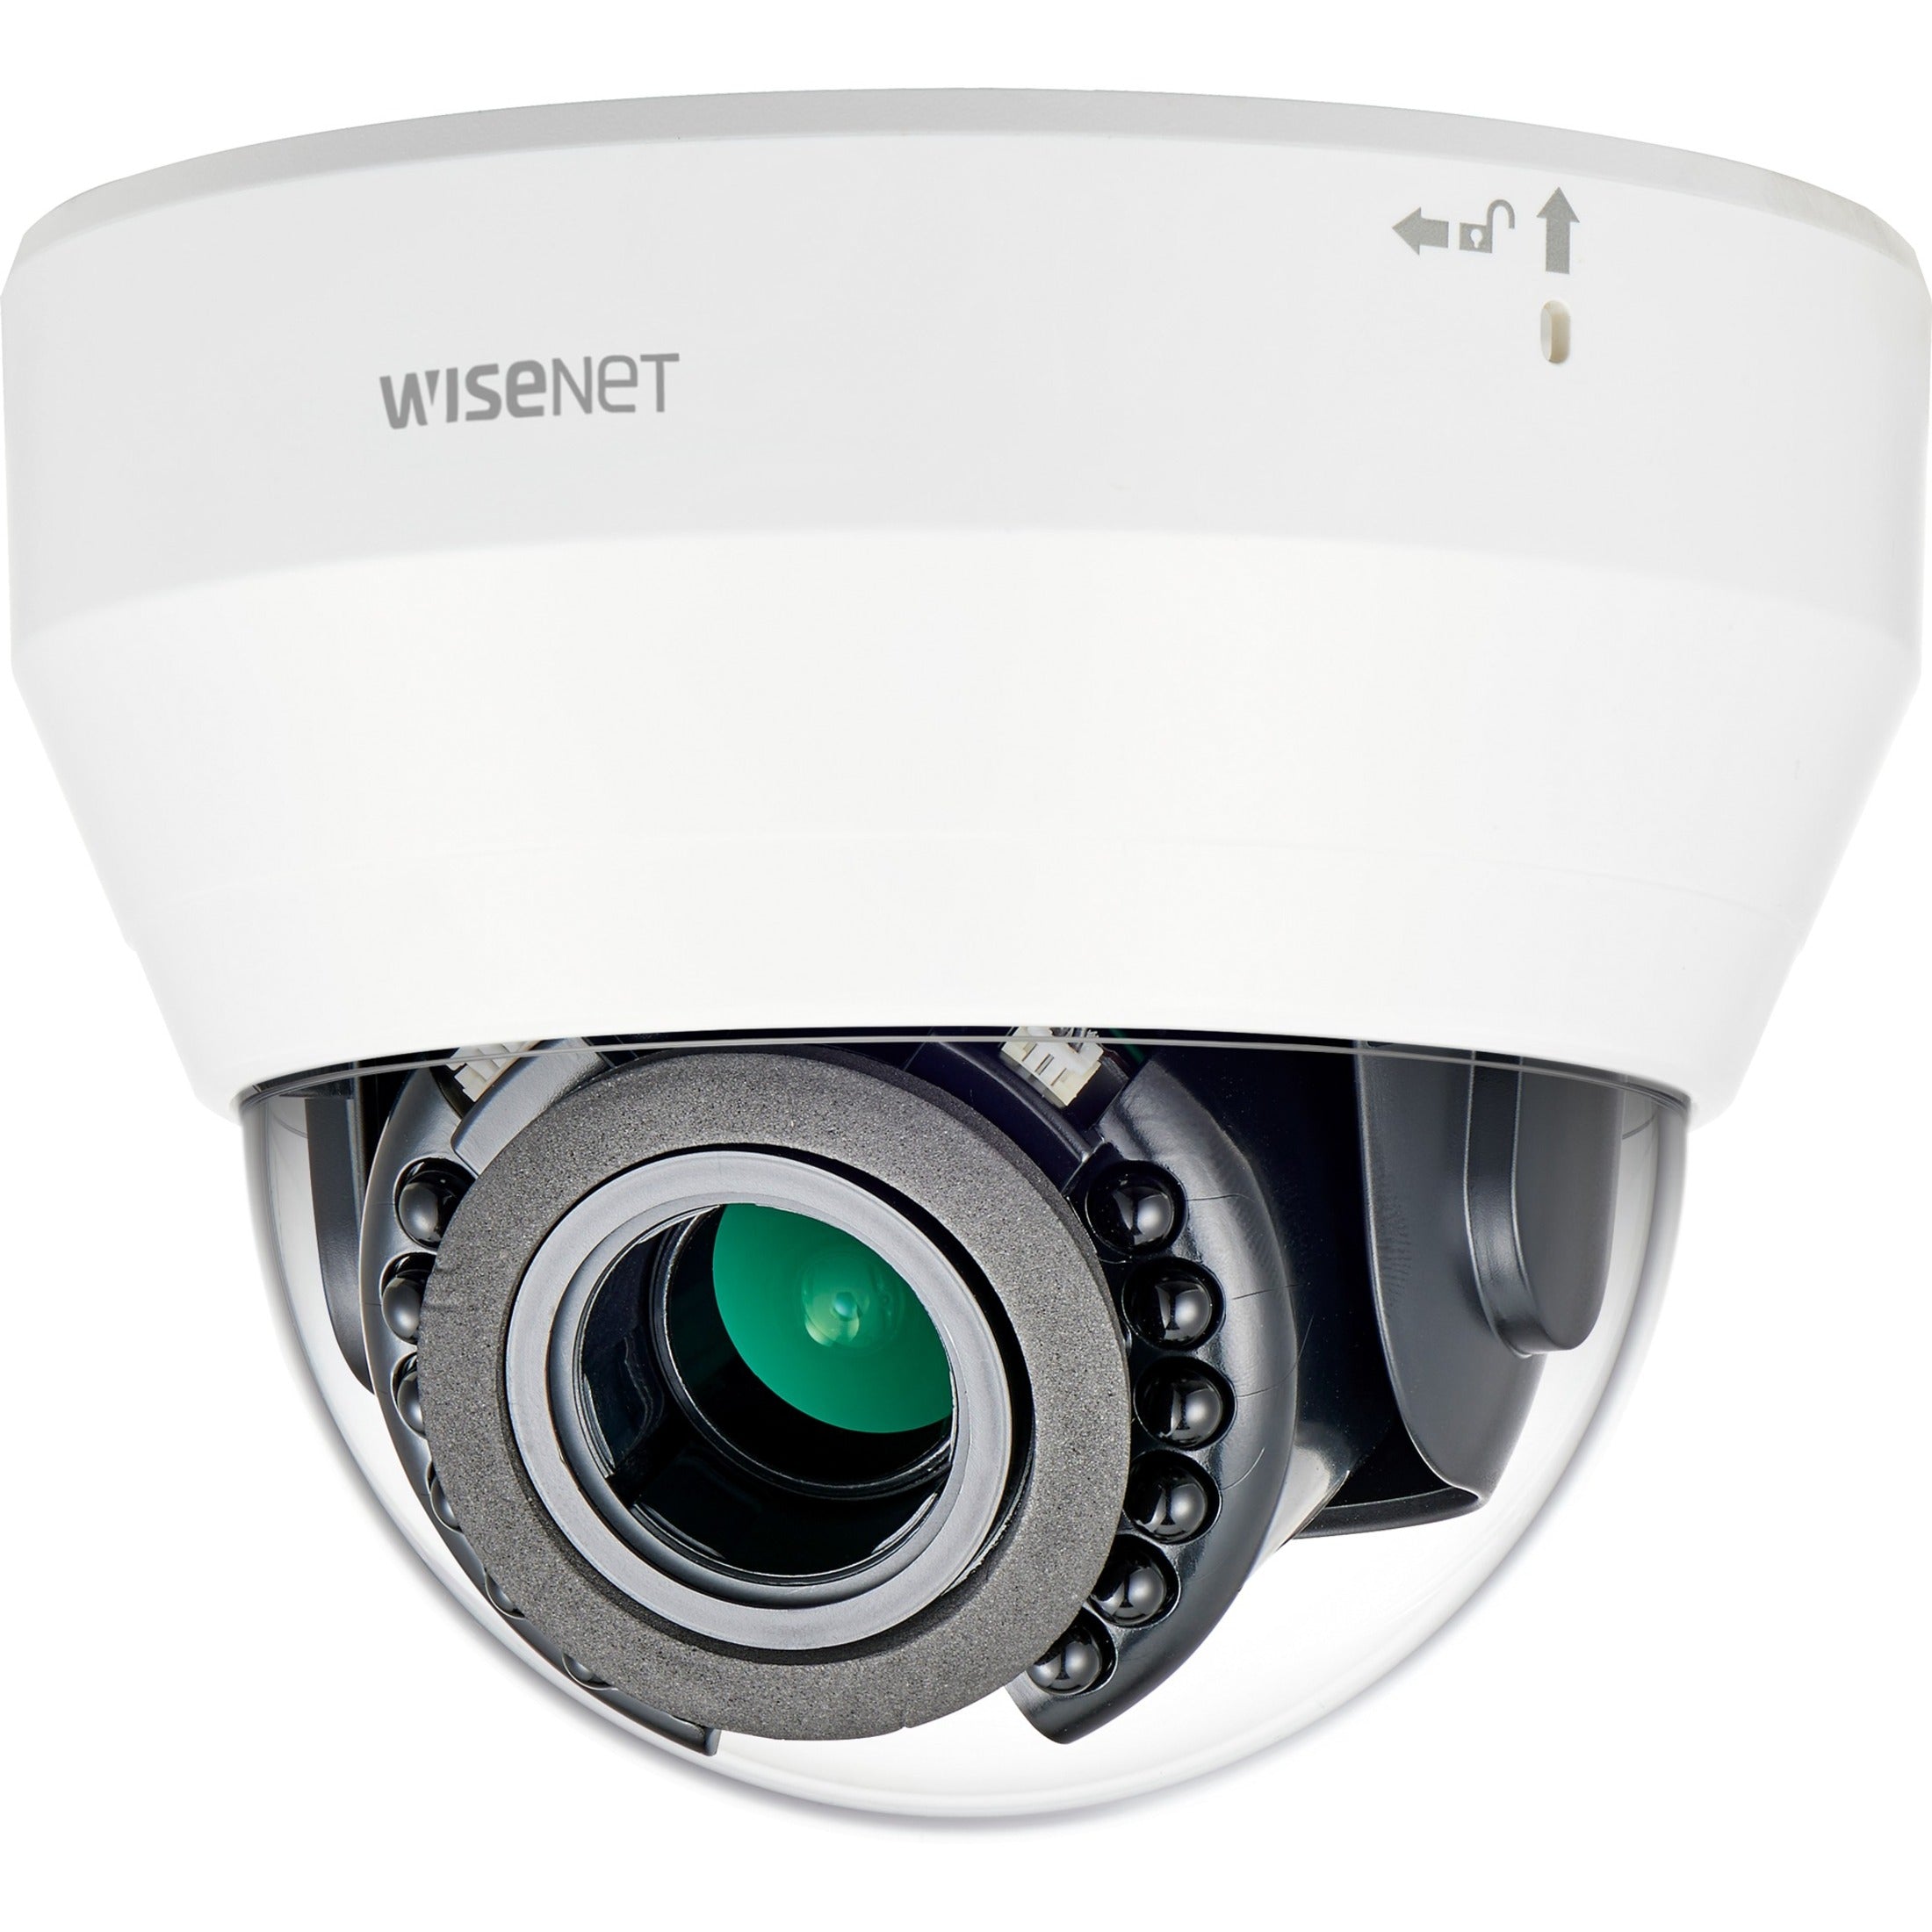 Wisenet LND-6012R 2MP IR Dome Camera, Indoor, 30fps, 3mm Fixed Focal Lens, Double Codec, 120dB WDR, SD Card, PoE, White